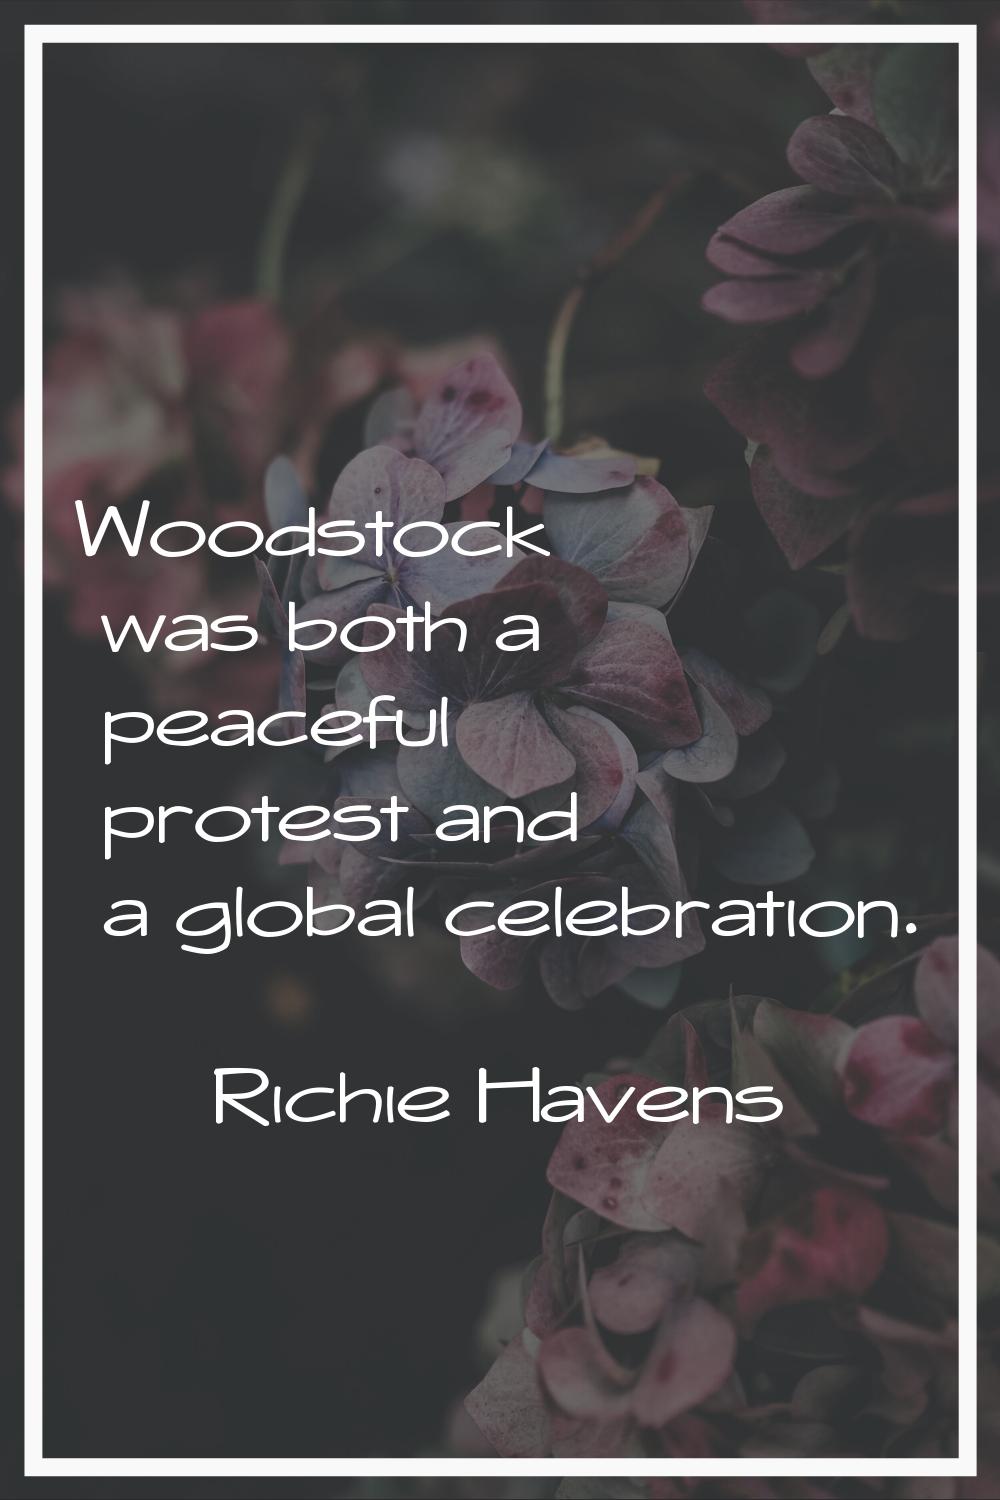 Woodstock was both a peaceful protest and a global celebration.